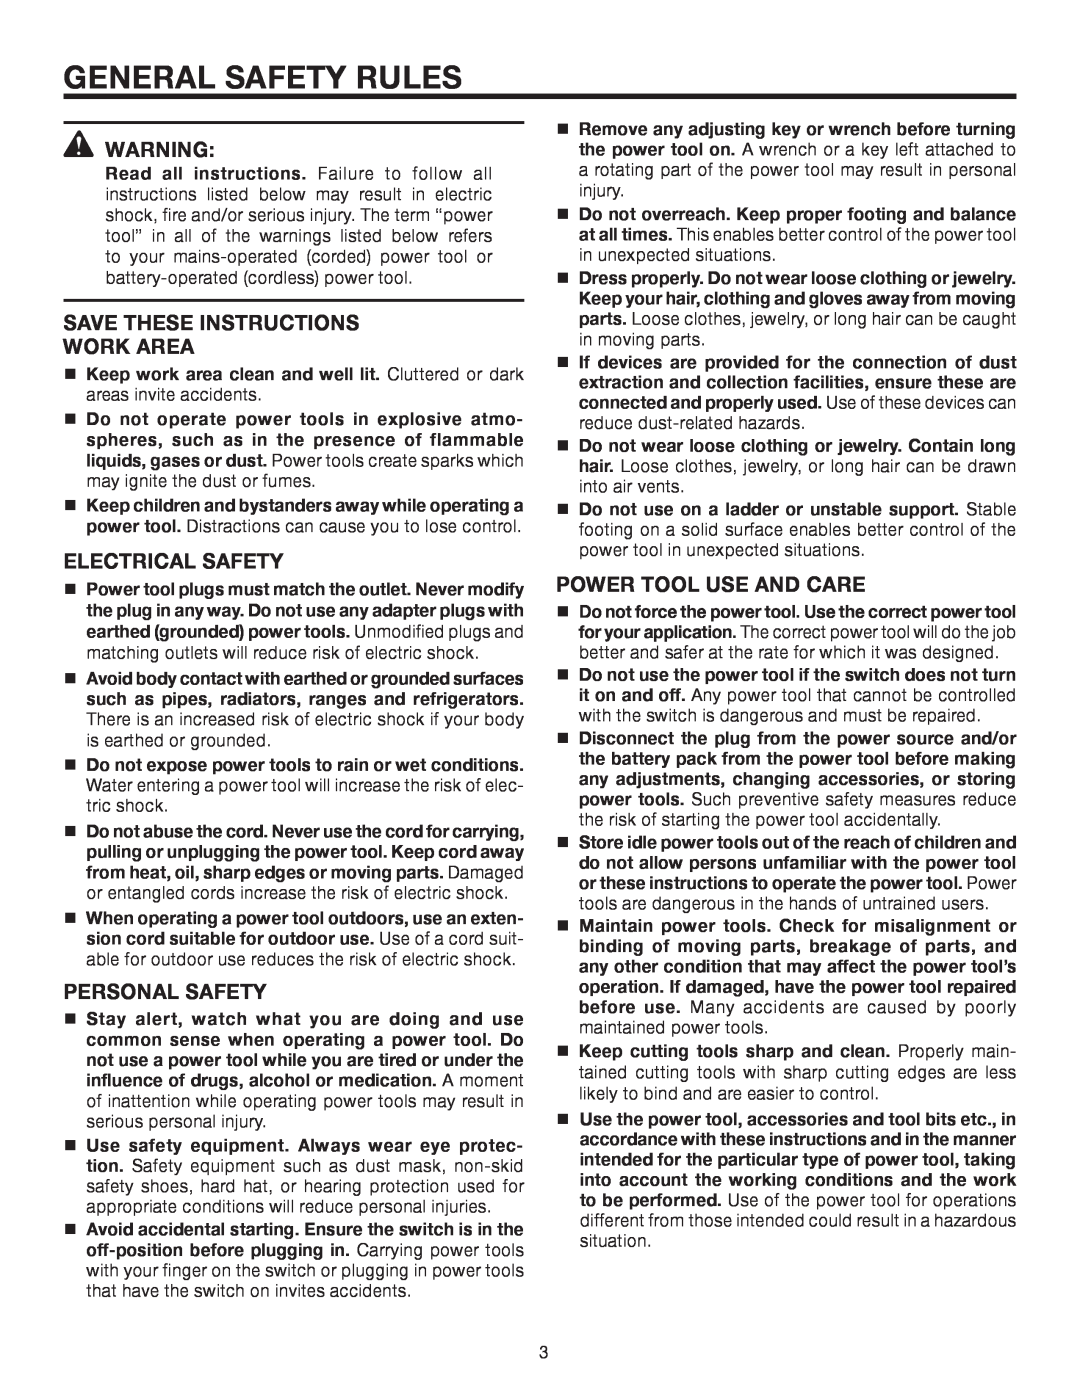 RIDGID R5013 manual General Safety Rules, Save These Instructions Work Area, Electrical Safety, Personal Safety 